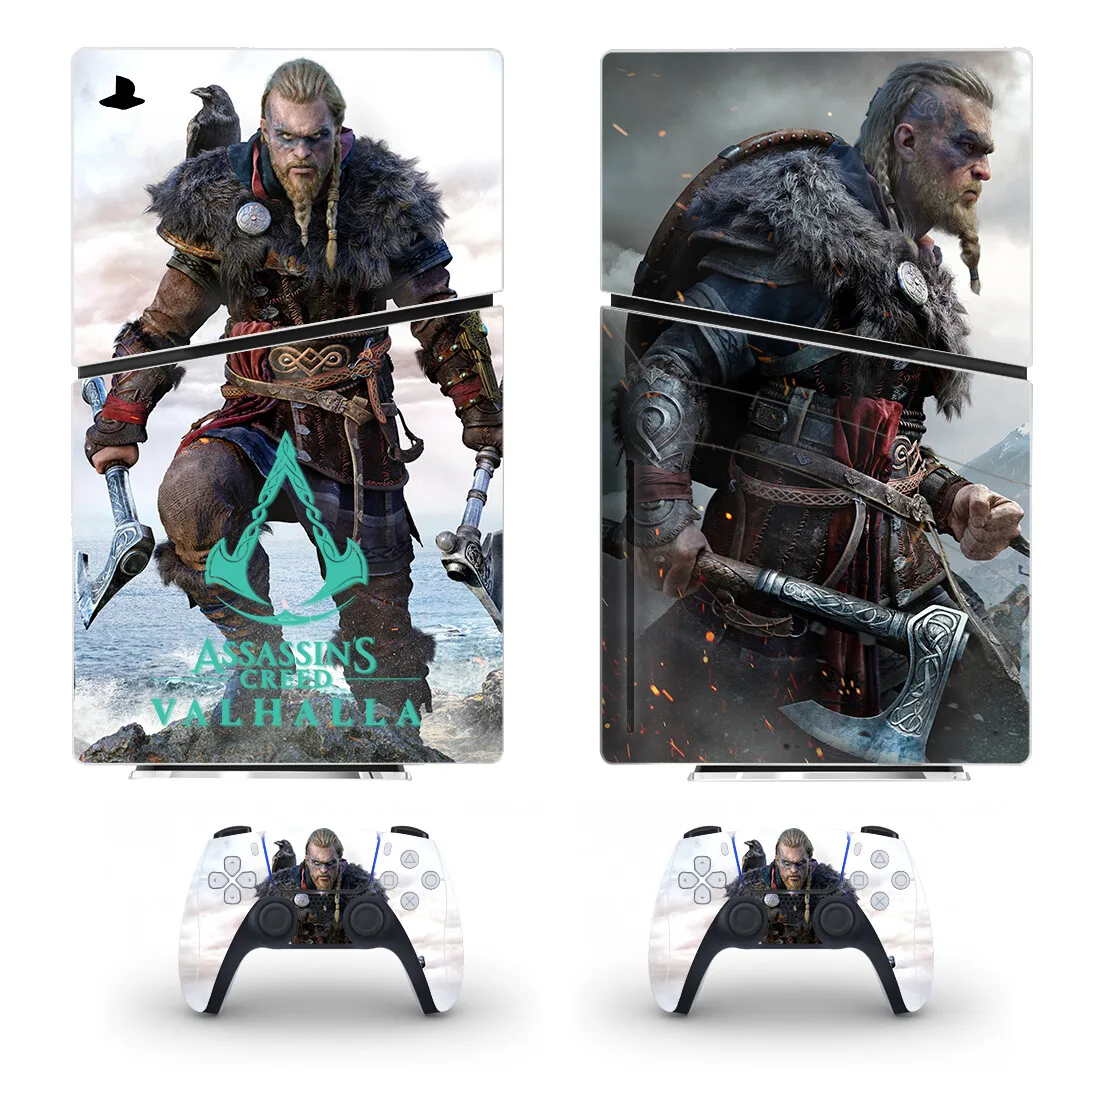 Game Alan Wake 2 PS5 Slim Disc Skin Sticker Decal Cover for Console and 2  Controllers New PS5 Slim Disk Skin Vinyl - AliExpress